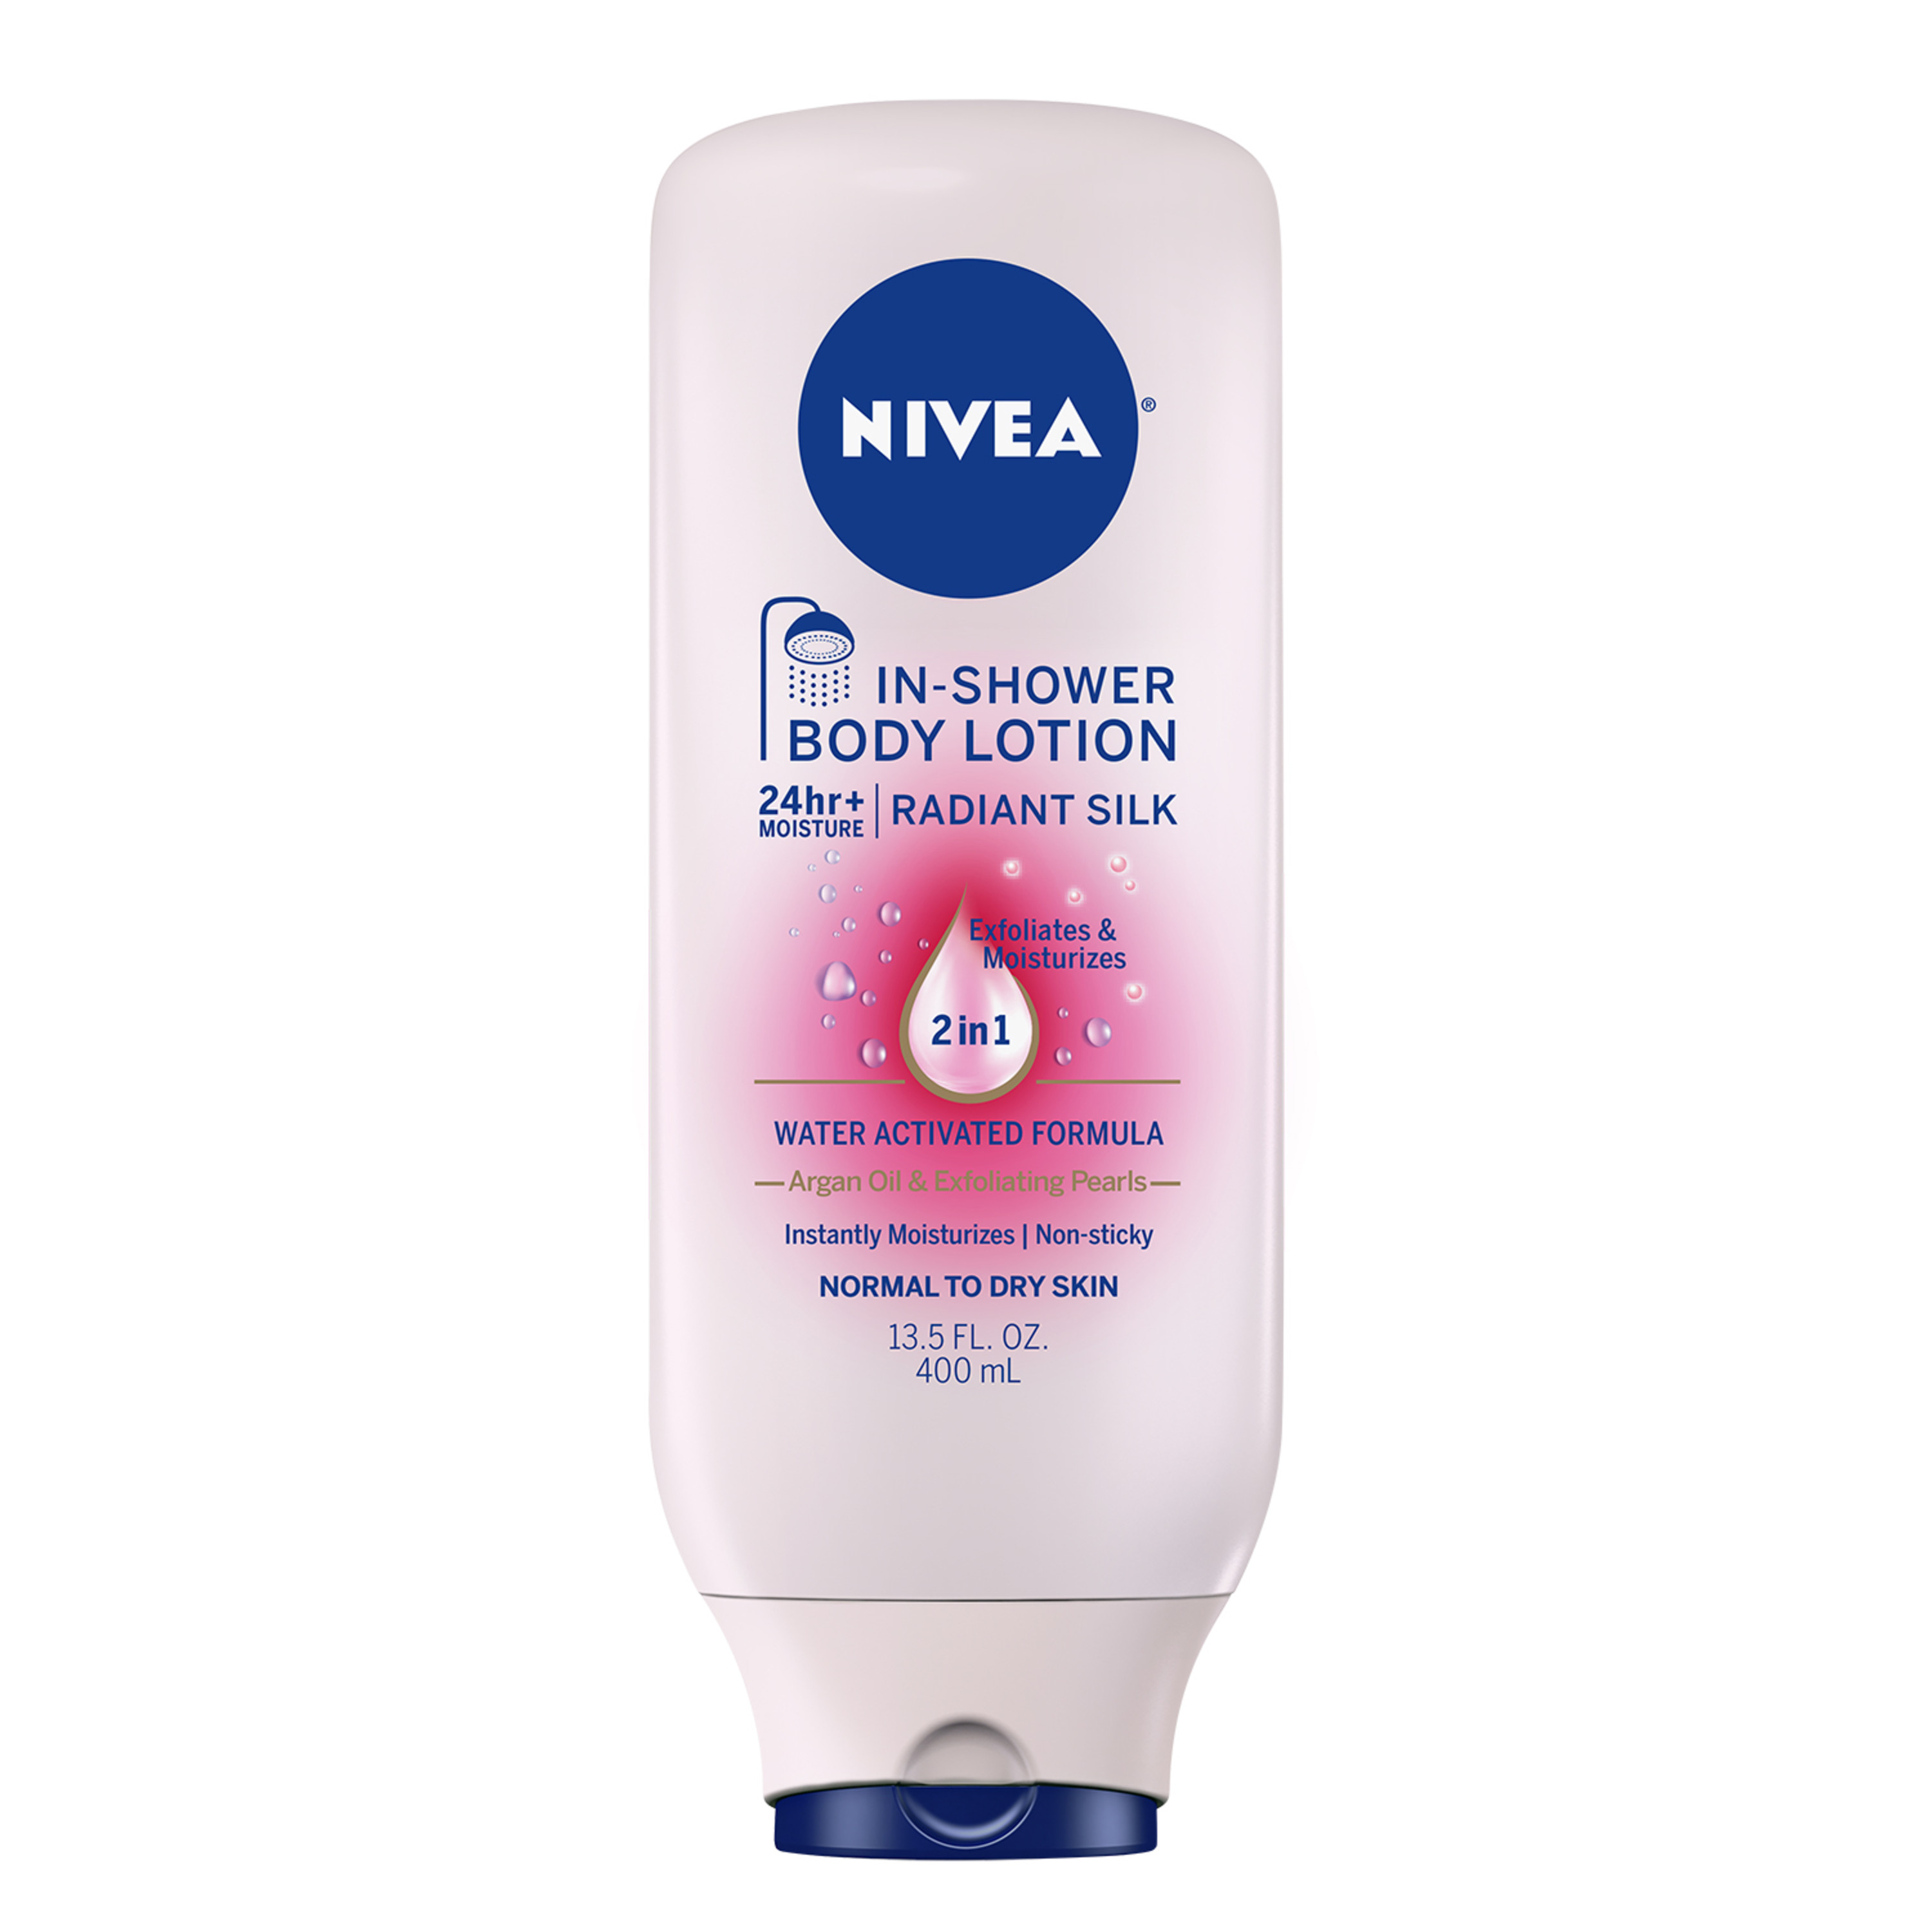 NIVEA Radiant Silk In Shower Body Lotion, 13.5 Fluid Ounce - image 1 of 2